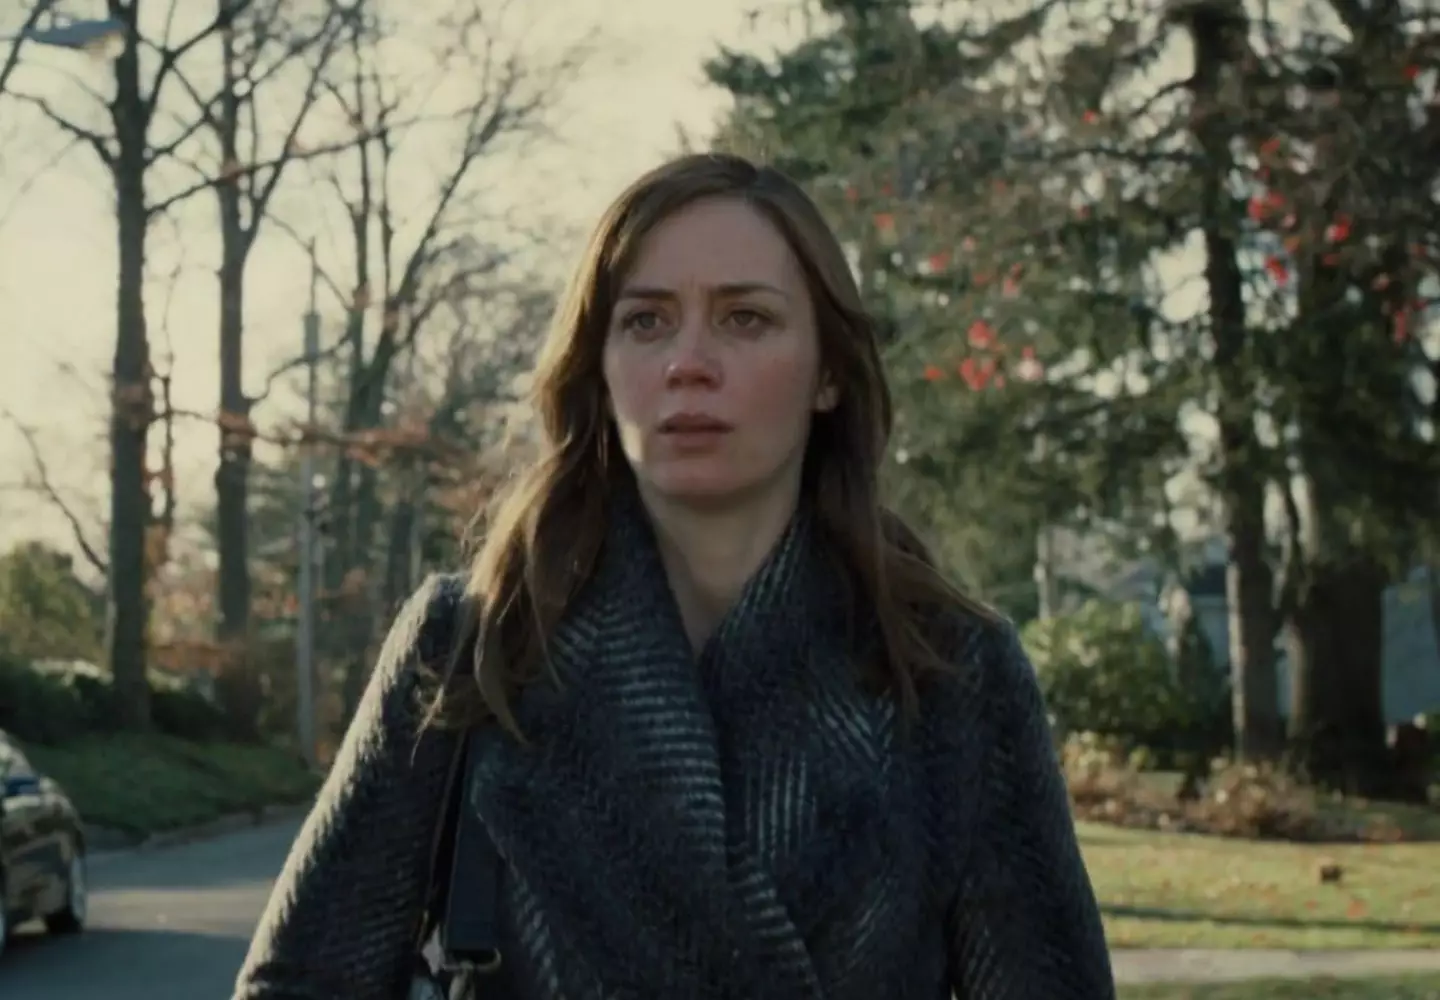 Emily Blunt plays a woman battling with alcohol and patchy memory. Universal Pictures